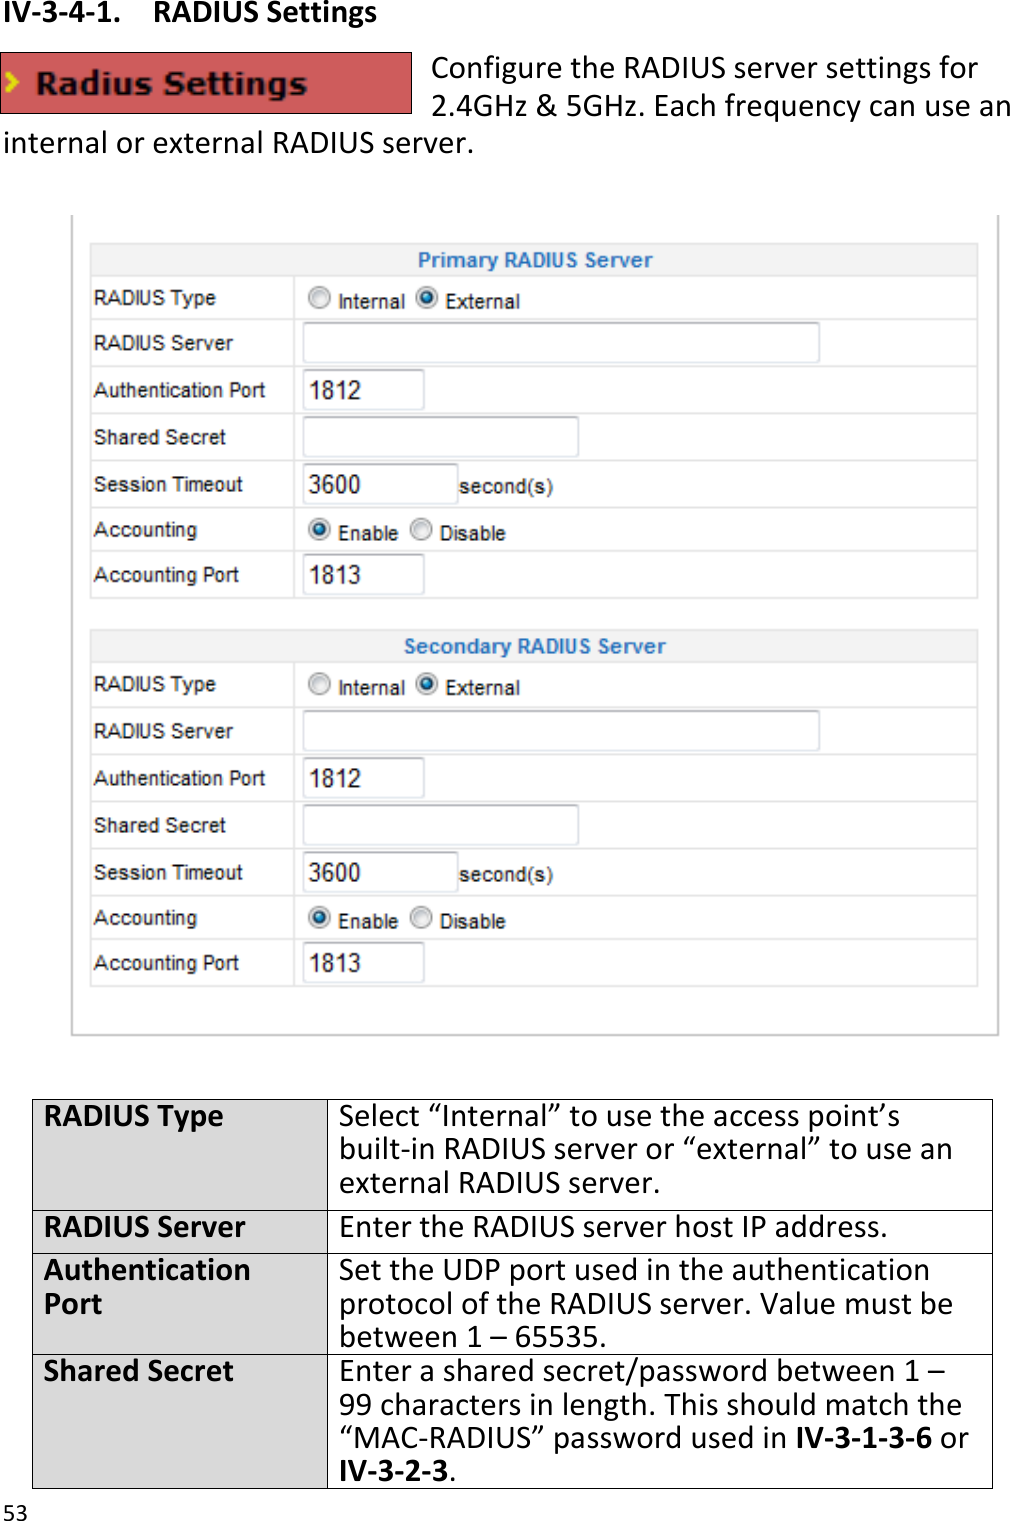 53  IV-3-4-1.  RADIUS Settings Configure the RADIUS server settings for 2.4GHz &amp; 5GHz. Each frequency can use an internal or external RADIUS server.    RADIUS Type Select “Internal” to use the access point’s built-in RADIUS server or “external” to use an external RADIUS server. RADIUS Server Enter the RADIUS server host IP address. Authentication Port Set the UDP port used in the authentication protocol of the RADIUS server. Value must be between 1 – 65535. Shared Secret Enter a shared secret/password between 1 – 99 characters in length. This should match the “MAC-RADIUS” password used in IV-3-1-3-6 or IV-3-2-3. 